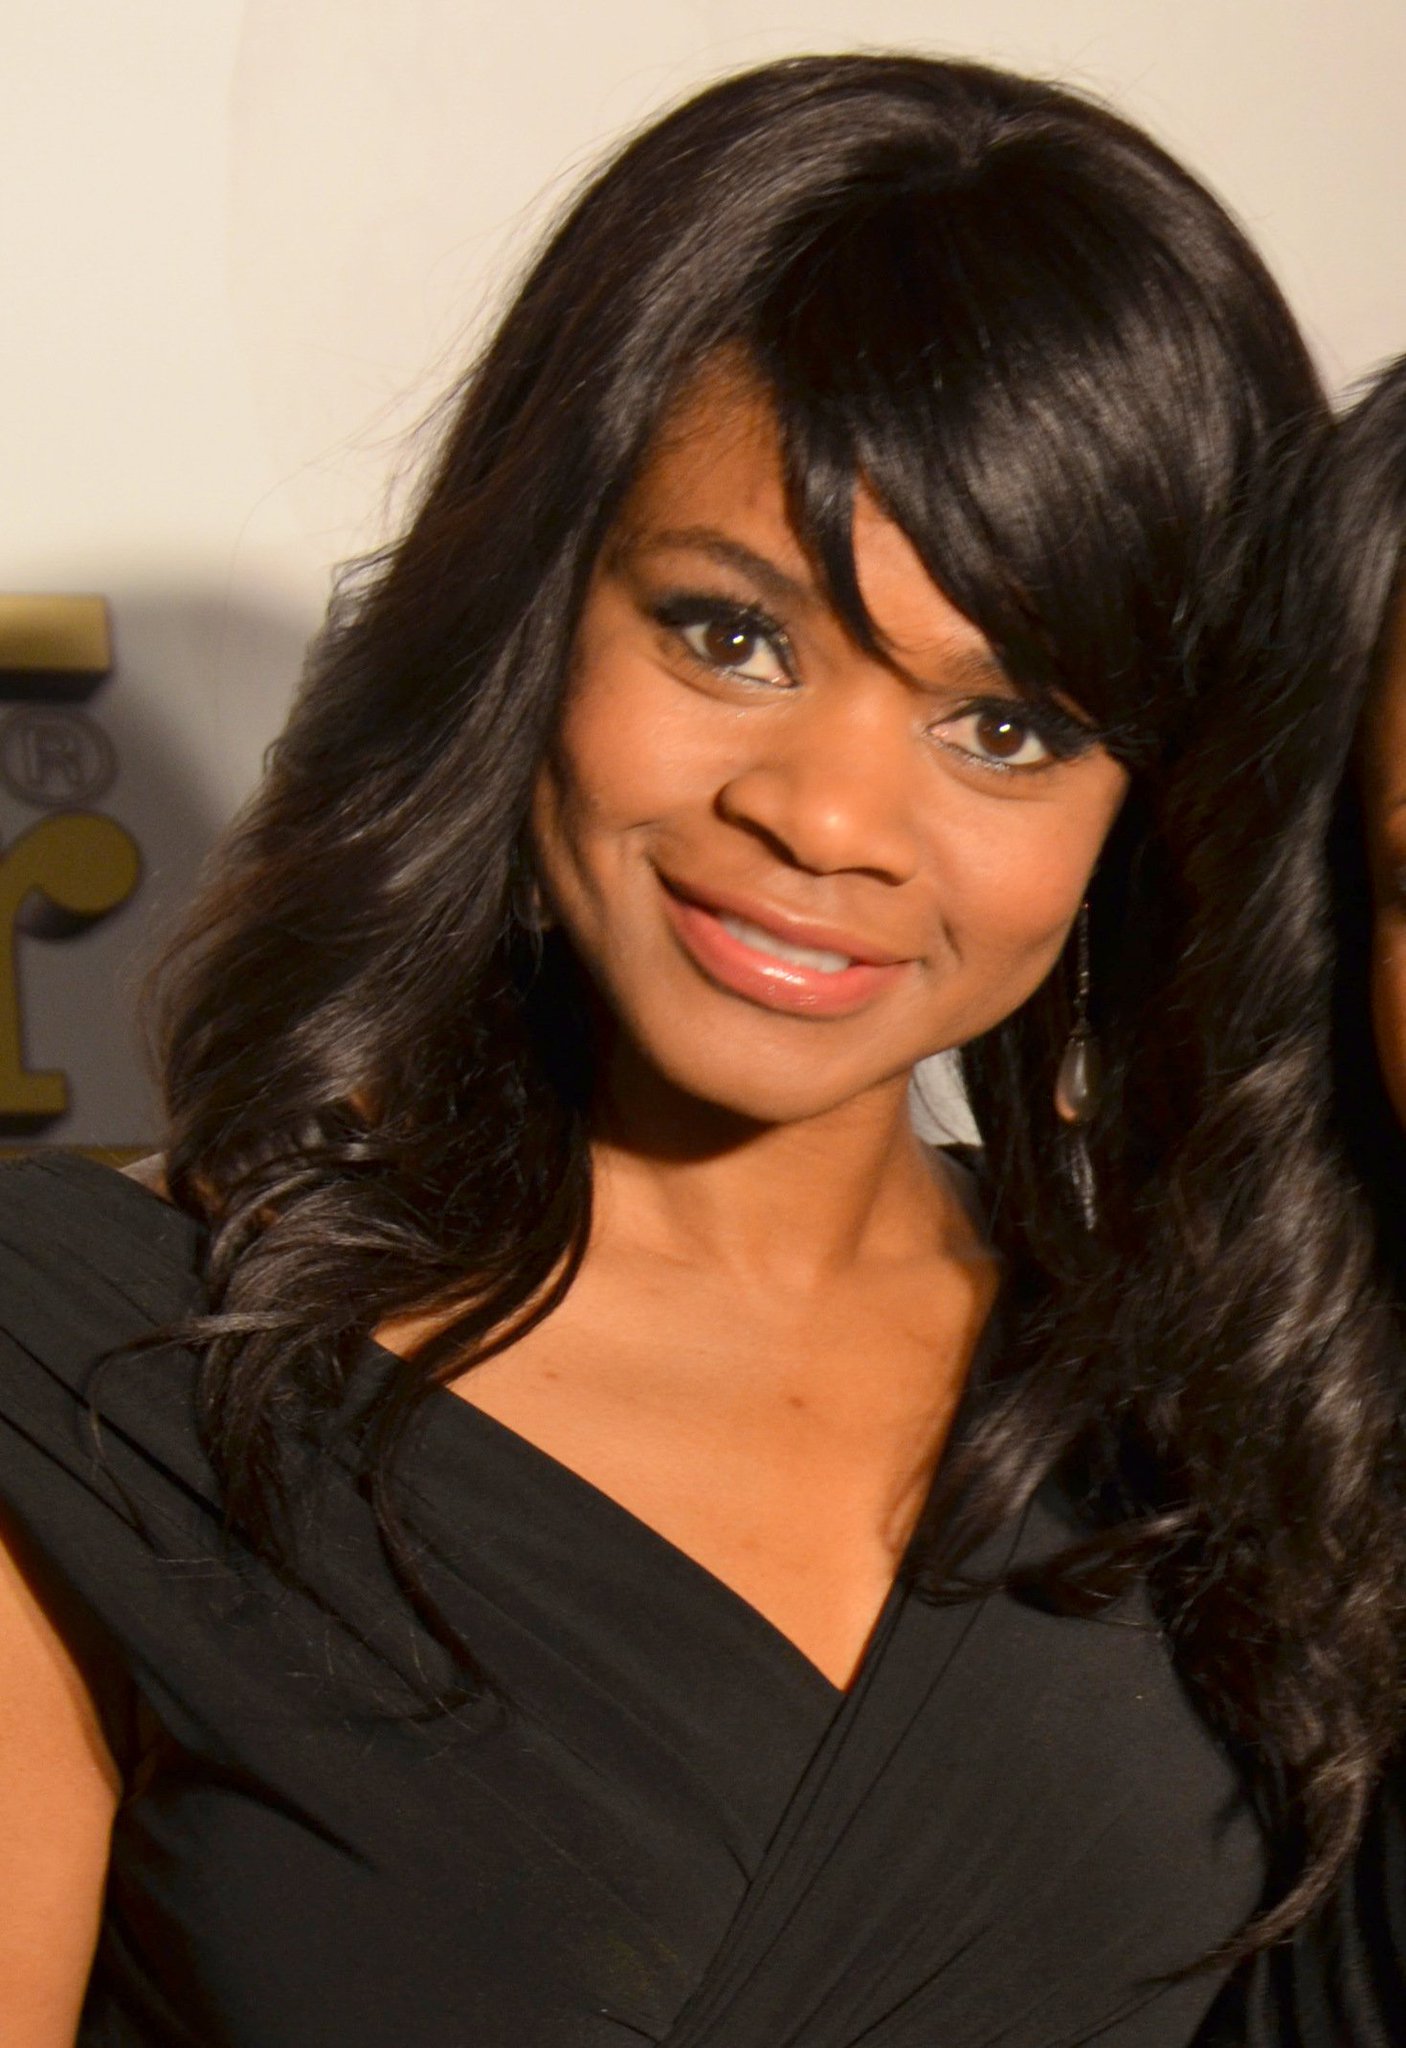  ON WITH Wishes:
Kimberly Elise A Happy Birthday! 